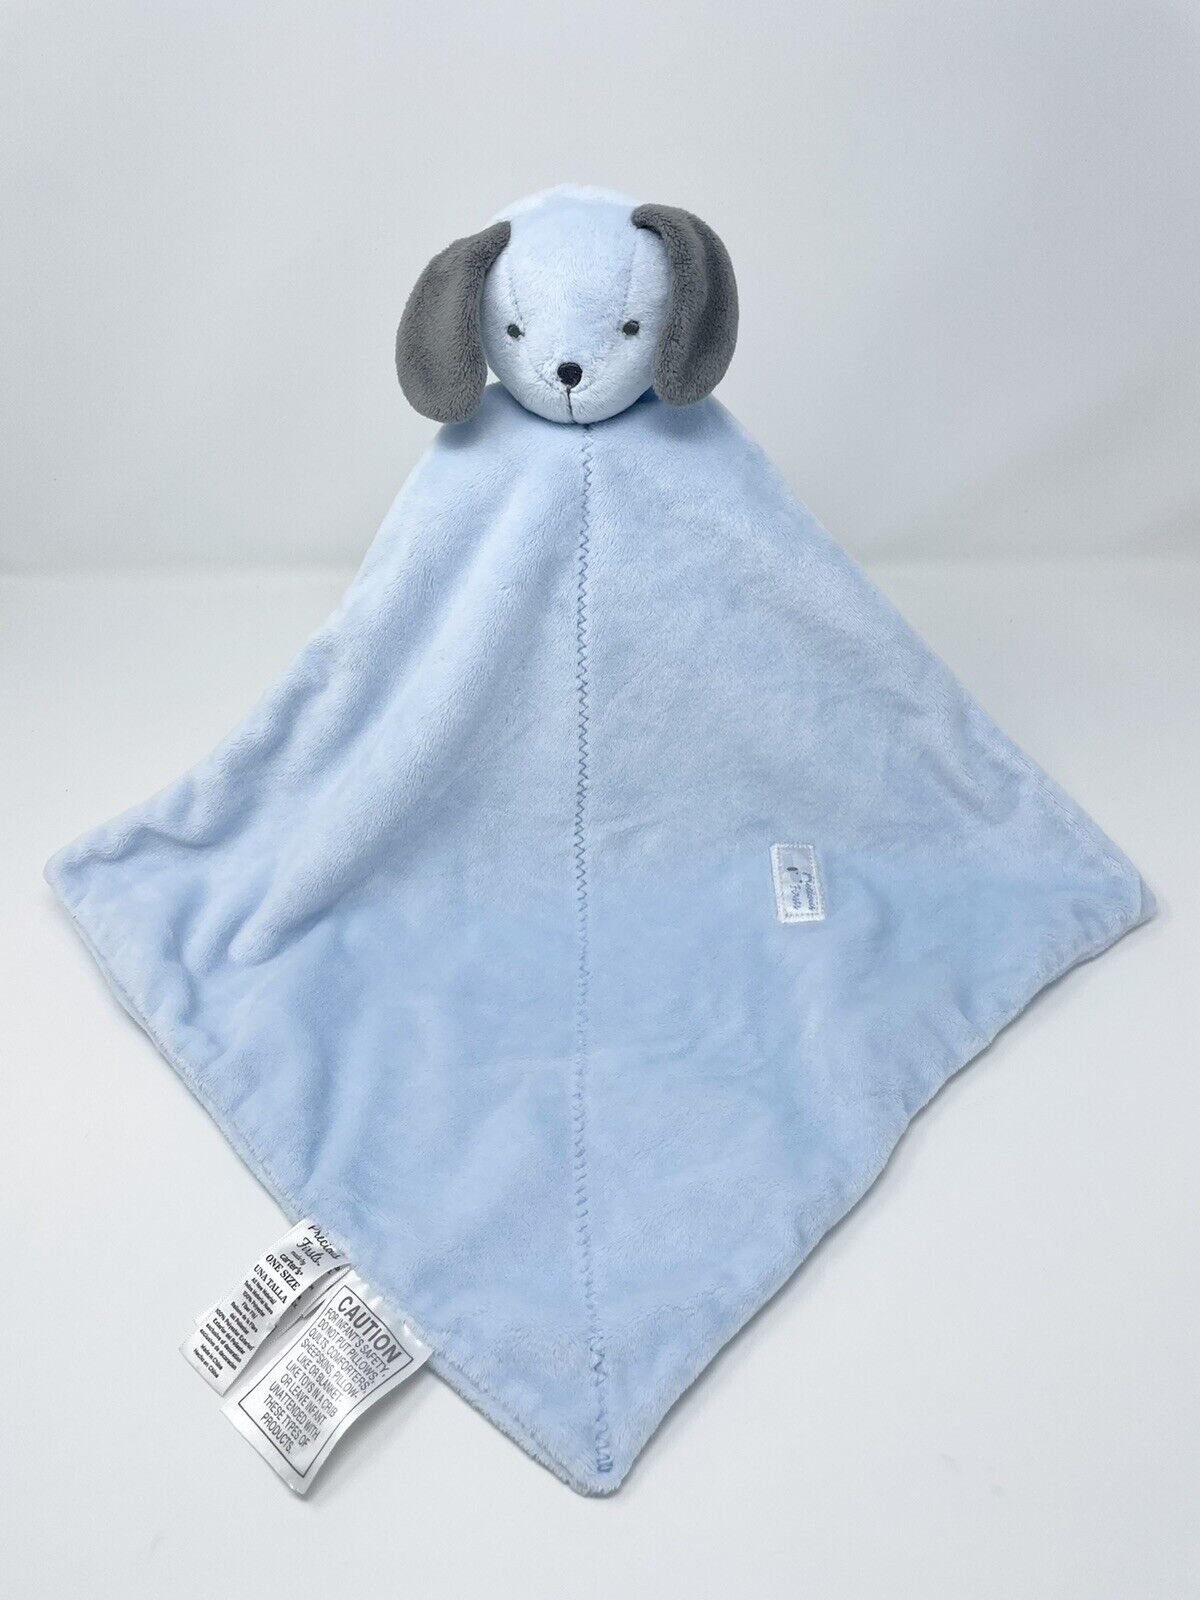 Carters Precious Firsts Blue Puppy Blanket To At Elegant the price of surprise Lovey Dog Security